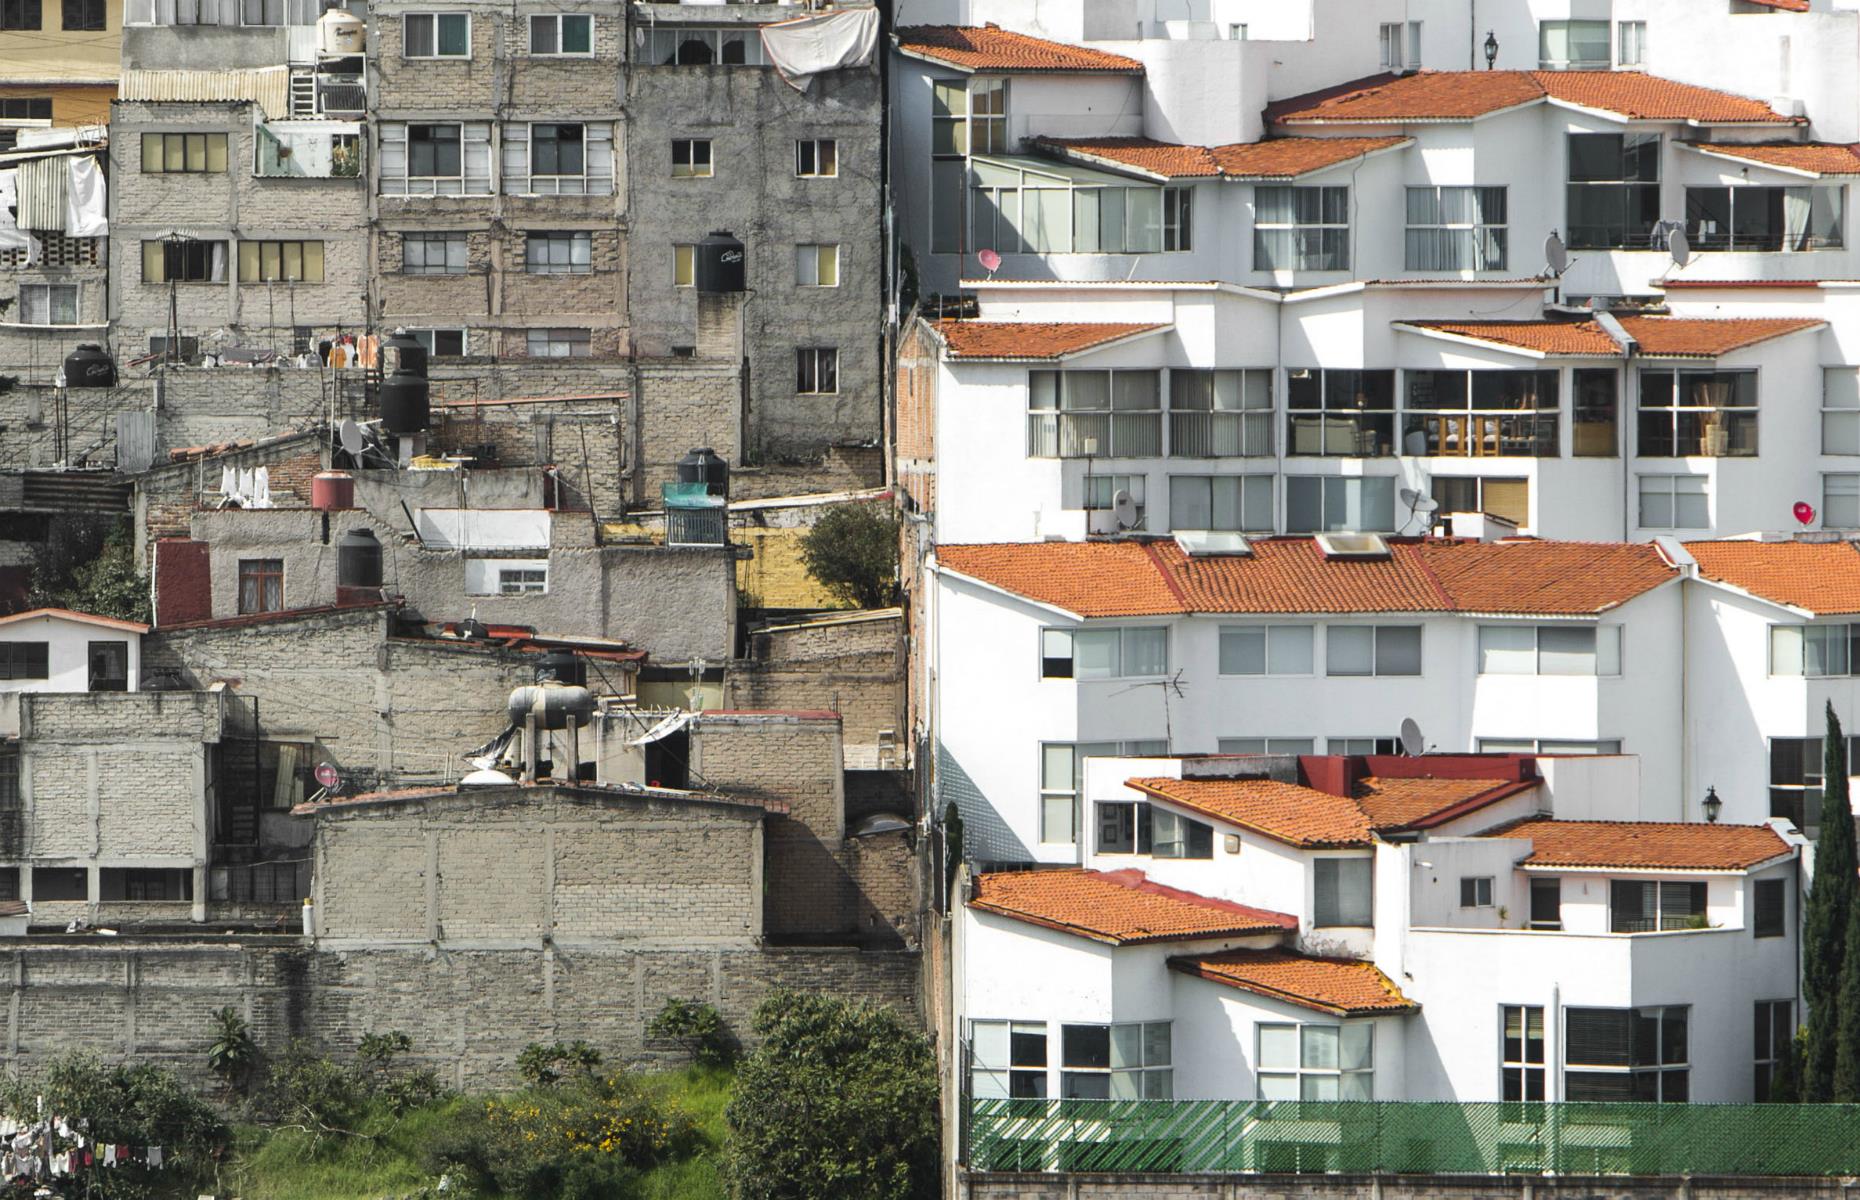 Mexico is the fourth most unequal country on the planet according to income, according to the latest OECD data. The country is no stranger to poverty, with more than 40% of Mexicans classified as poor. This image from Mexico City shows how closely the concrete homes of the city's poor sit next to the painted homes and tiled roofs of the more affluent.